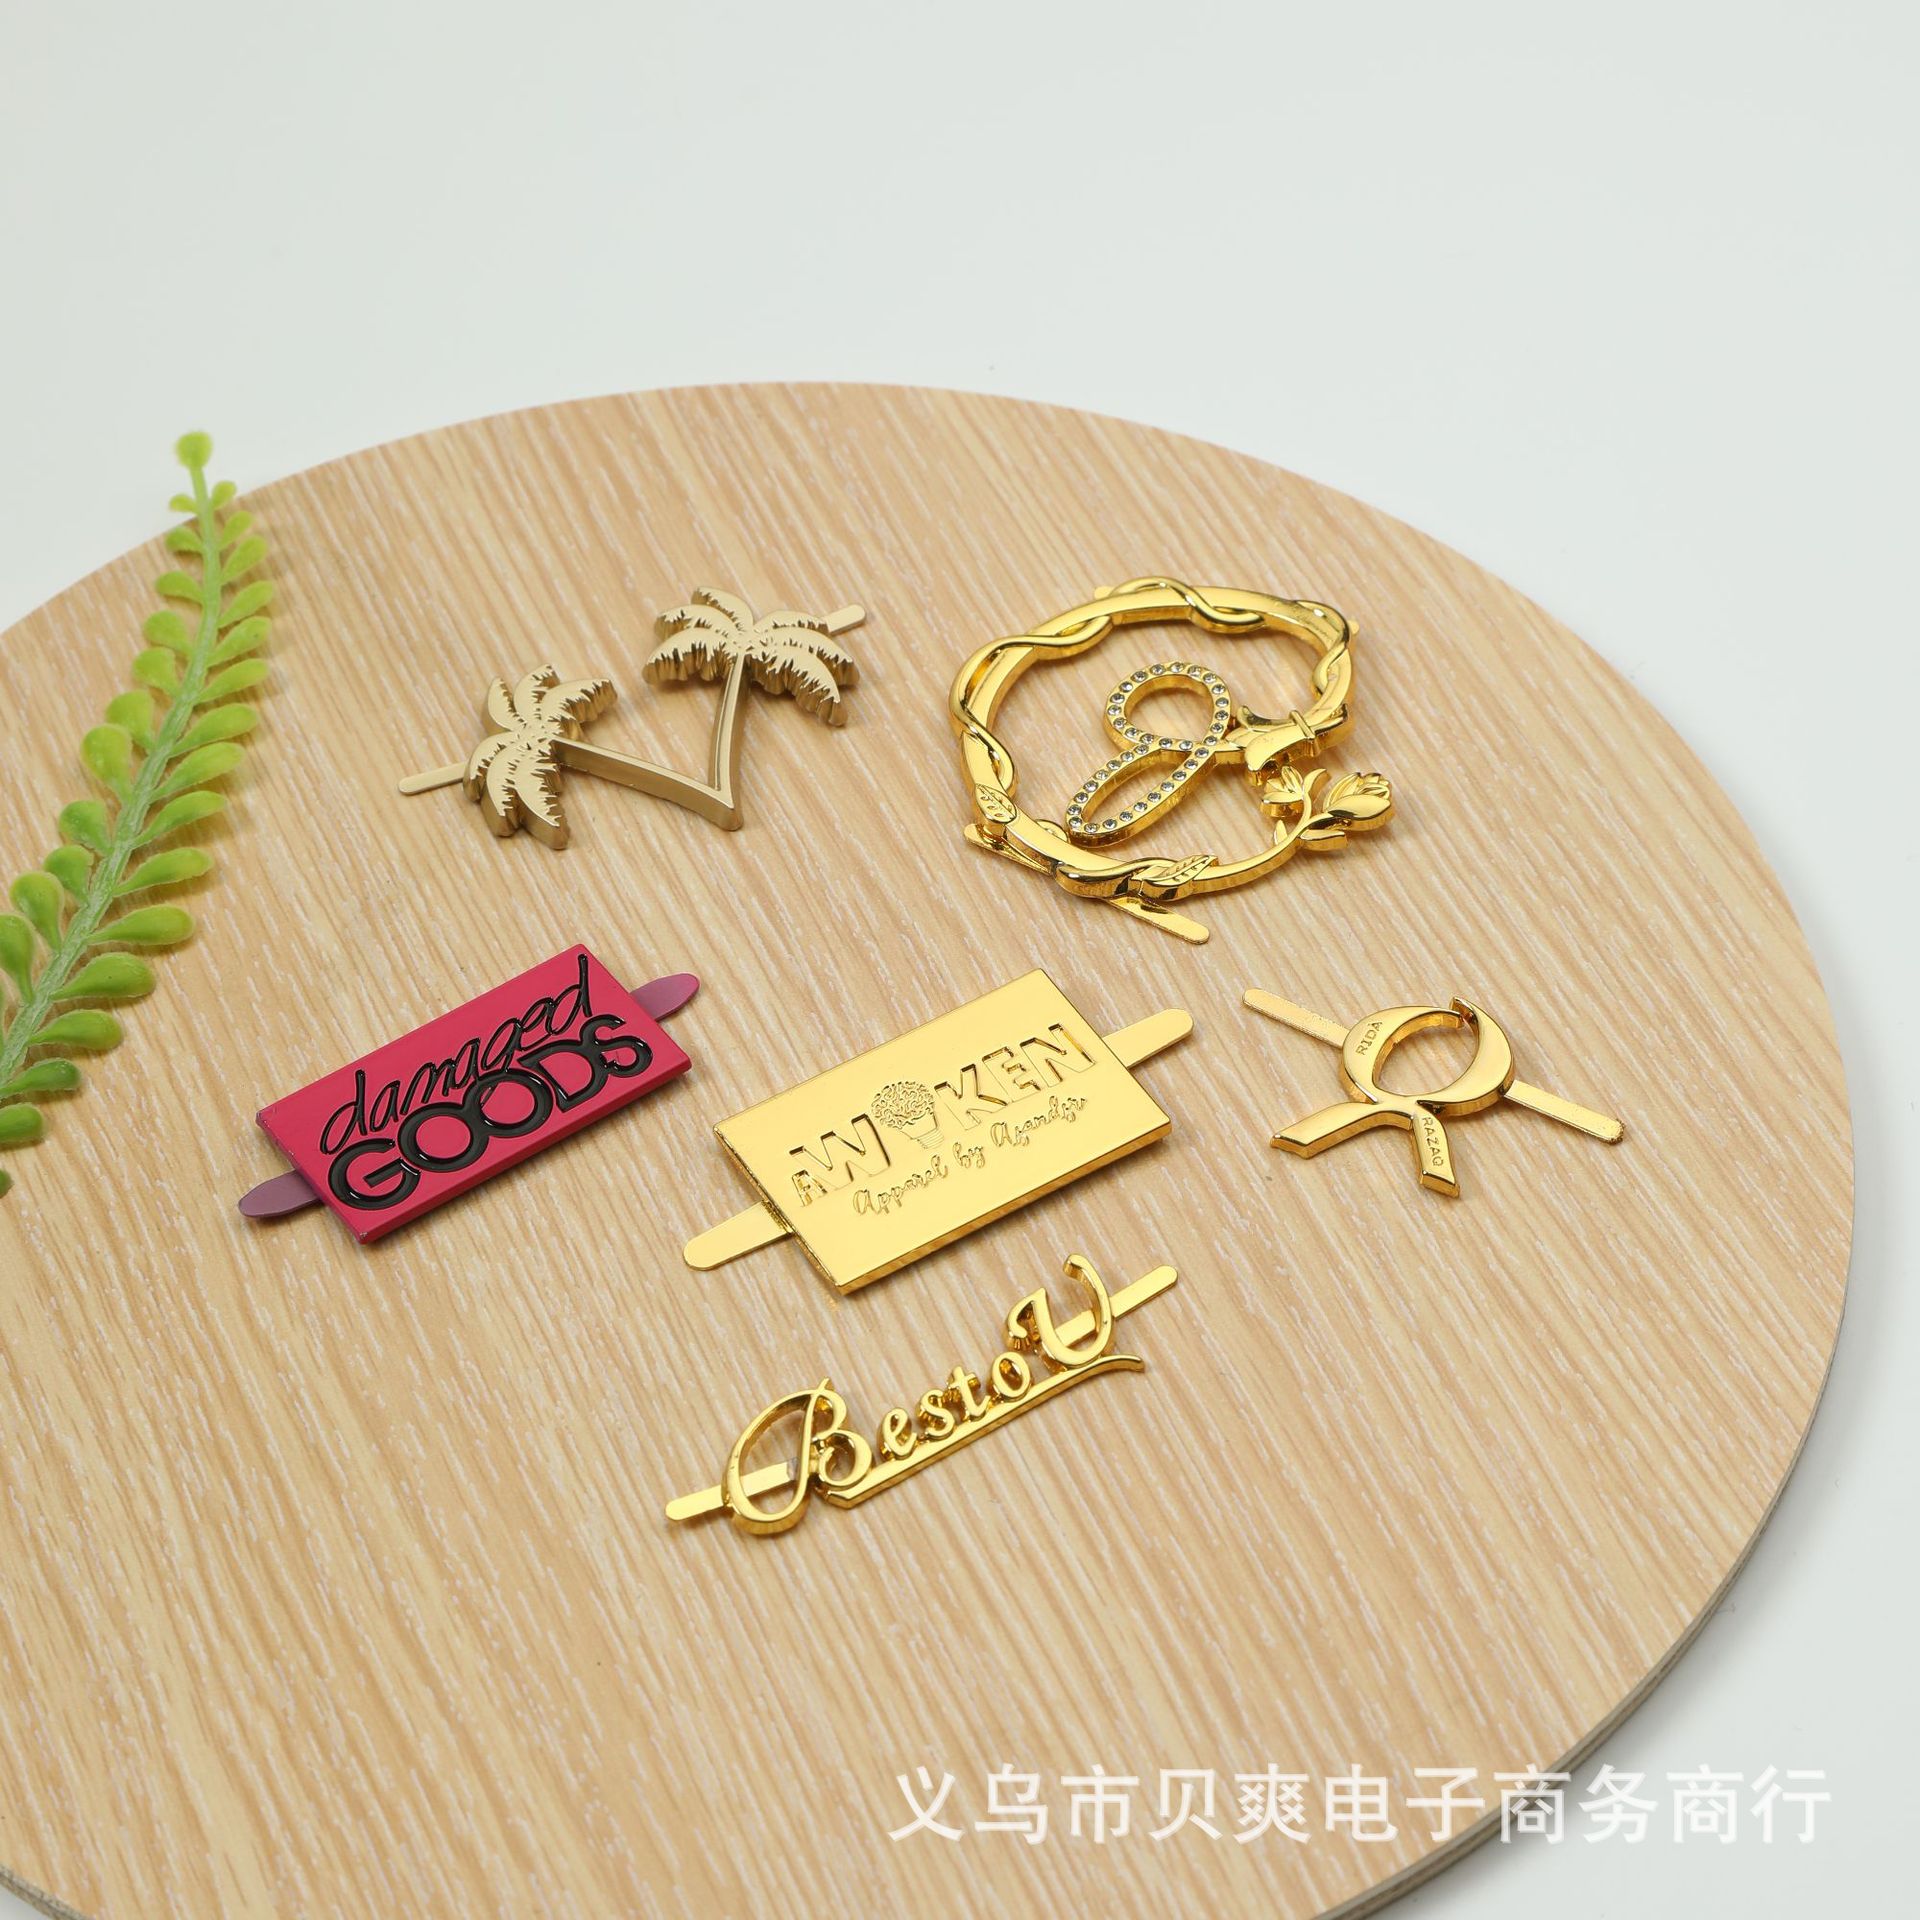 Factory Made Bag Leather Bag Label Nameplate Die Casting Zinc Alloy Pin Stitching Sign Can Be Customized Various Designs